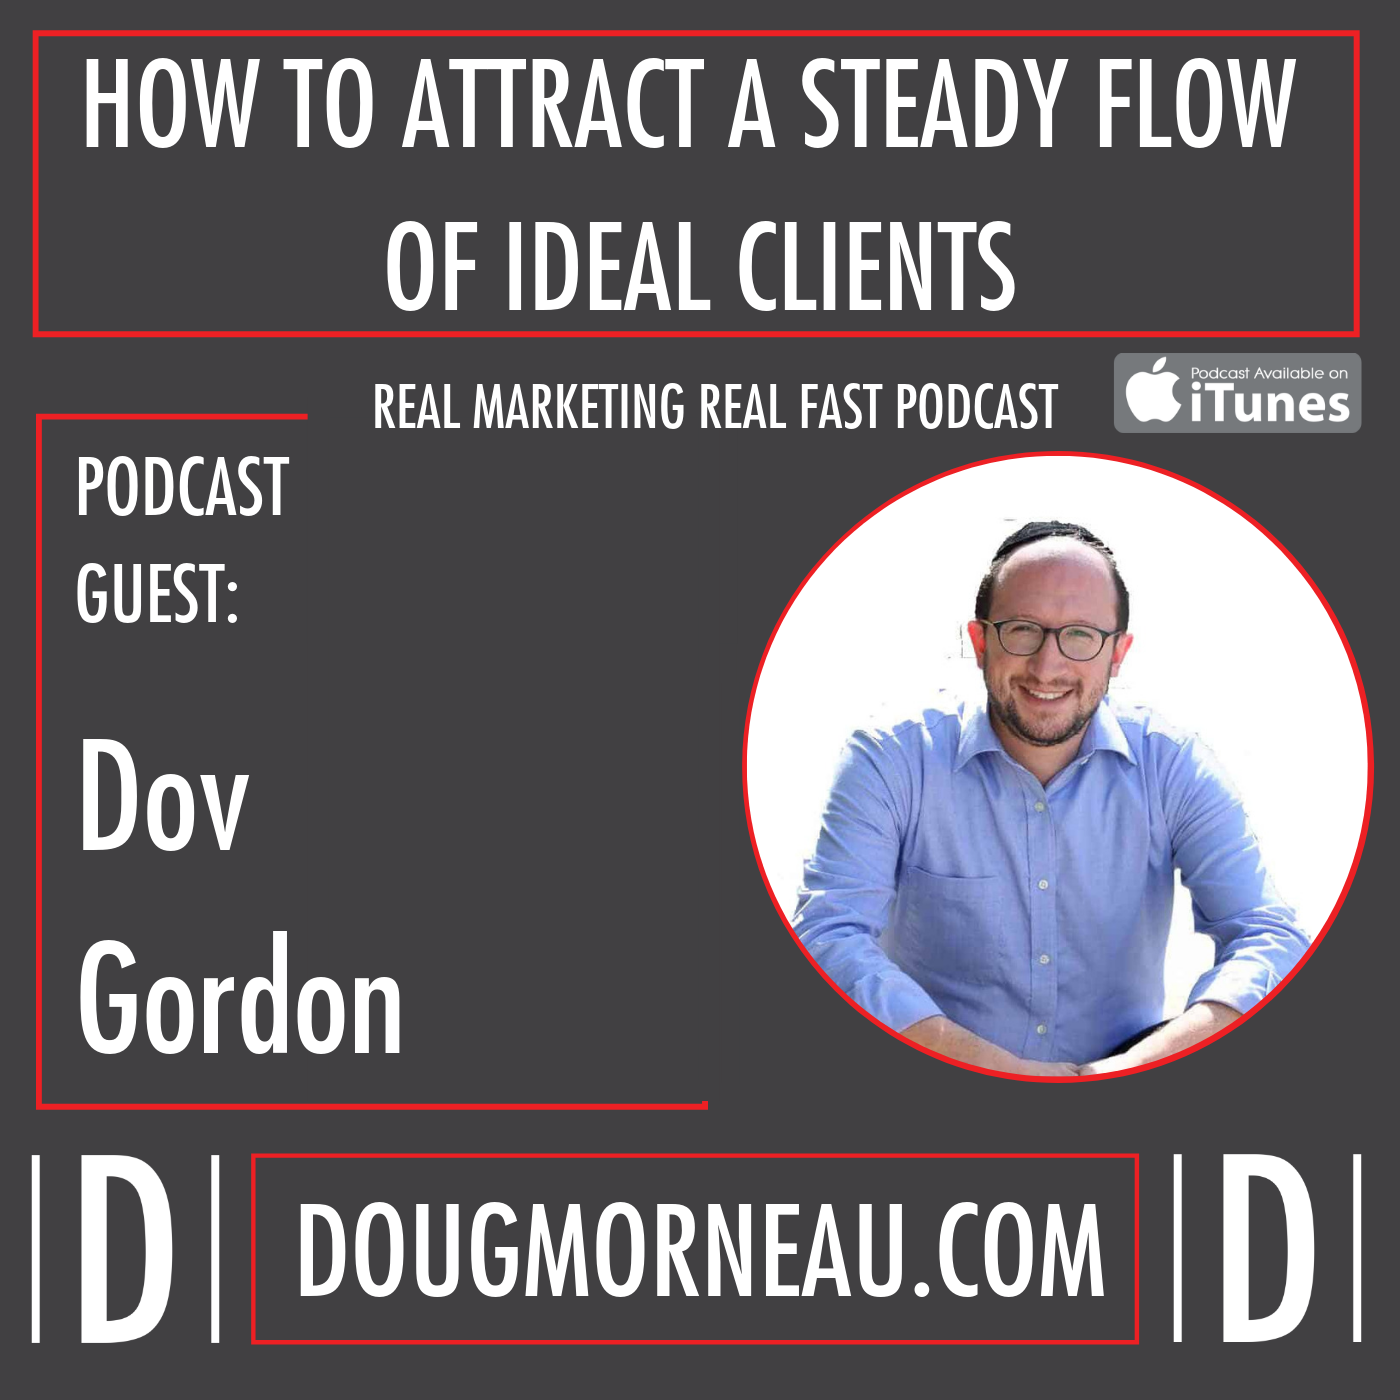 HOW TO ATTRACT A STEADY FLOW OF IDEAL CLIENTS - DOV GORDON - DOUG MORNEAU - REAL MARKETING REAL FAST PODCAST